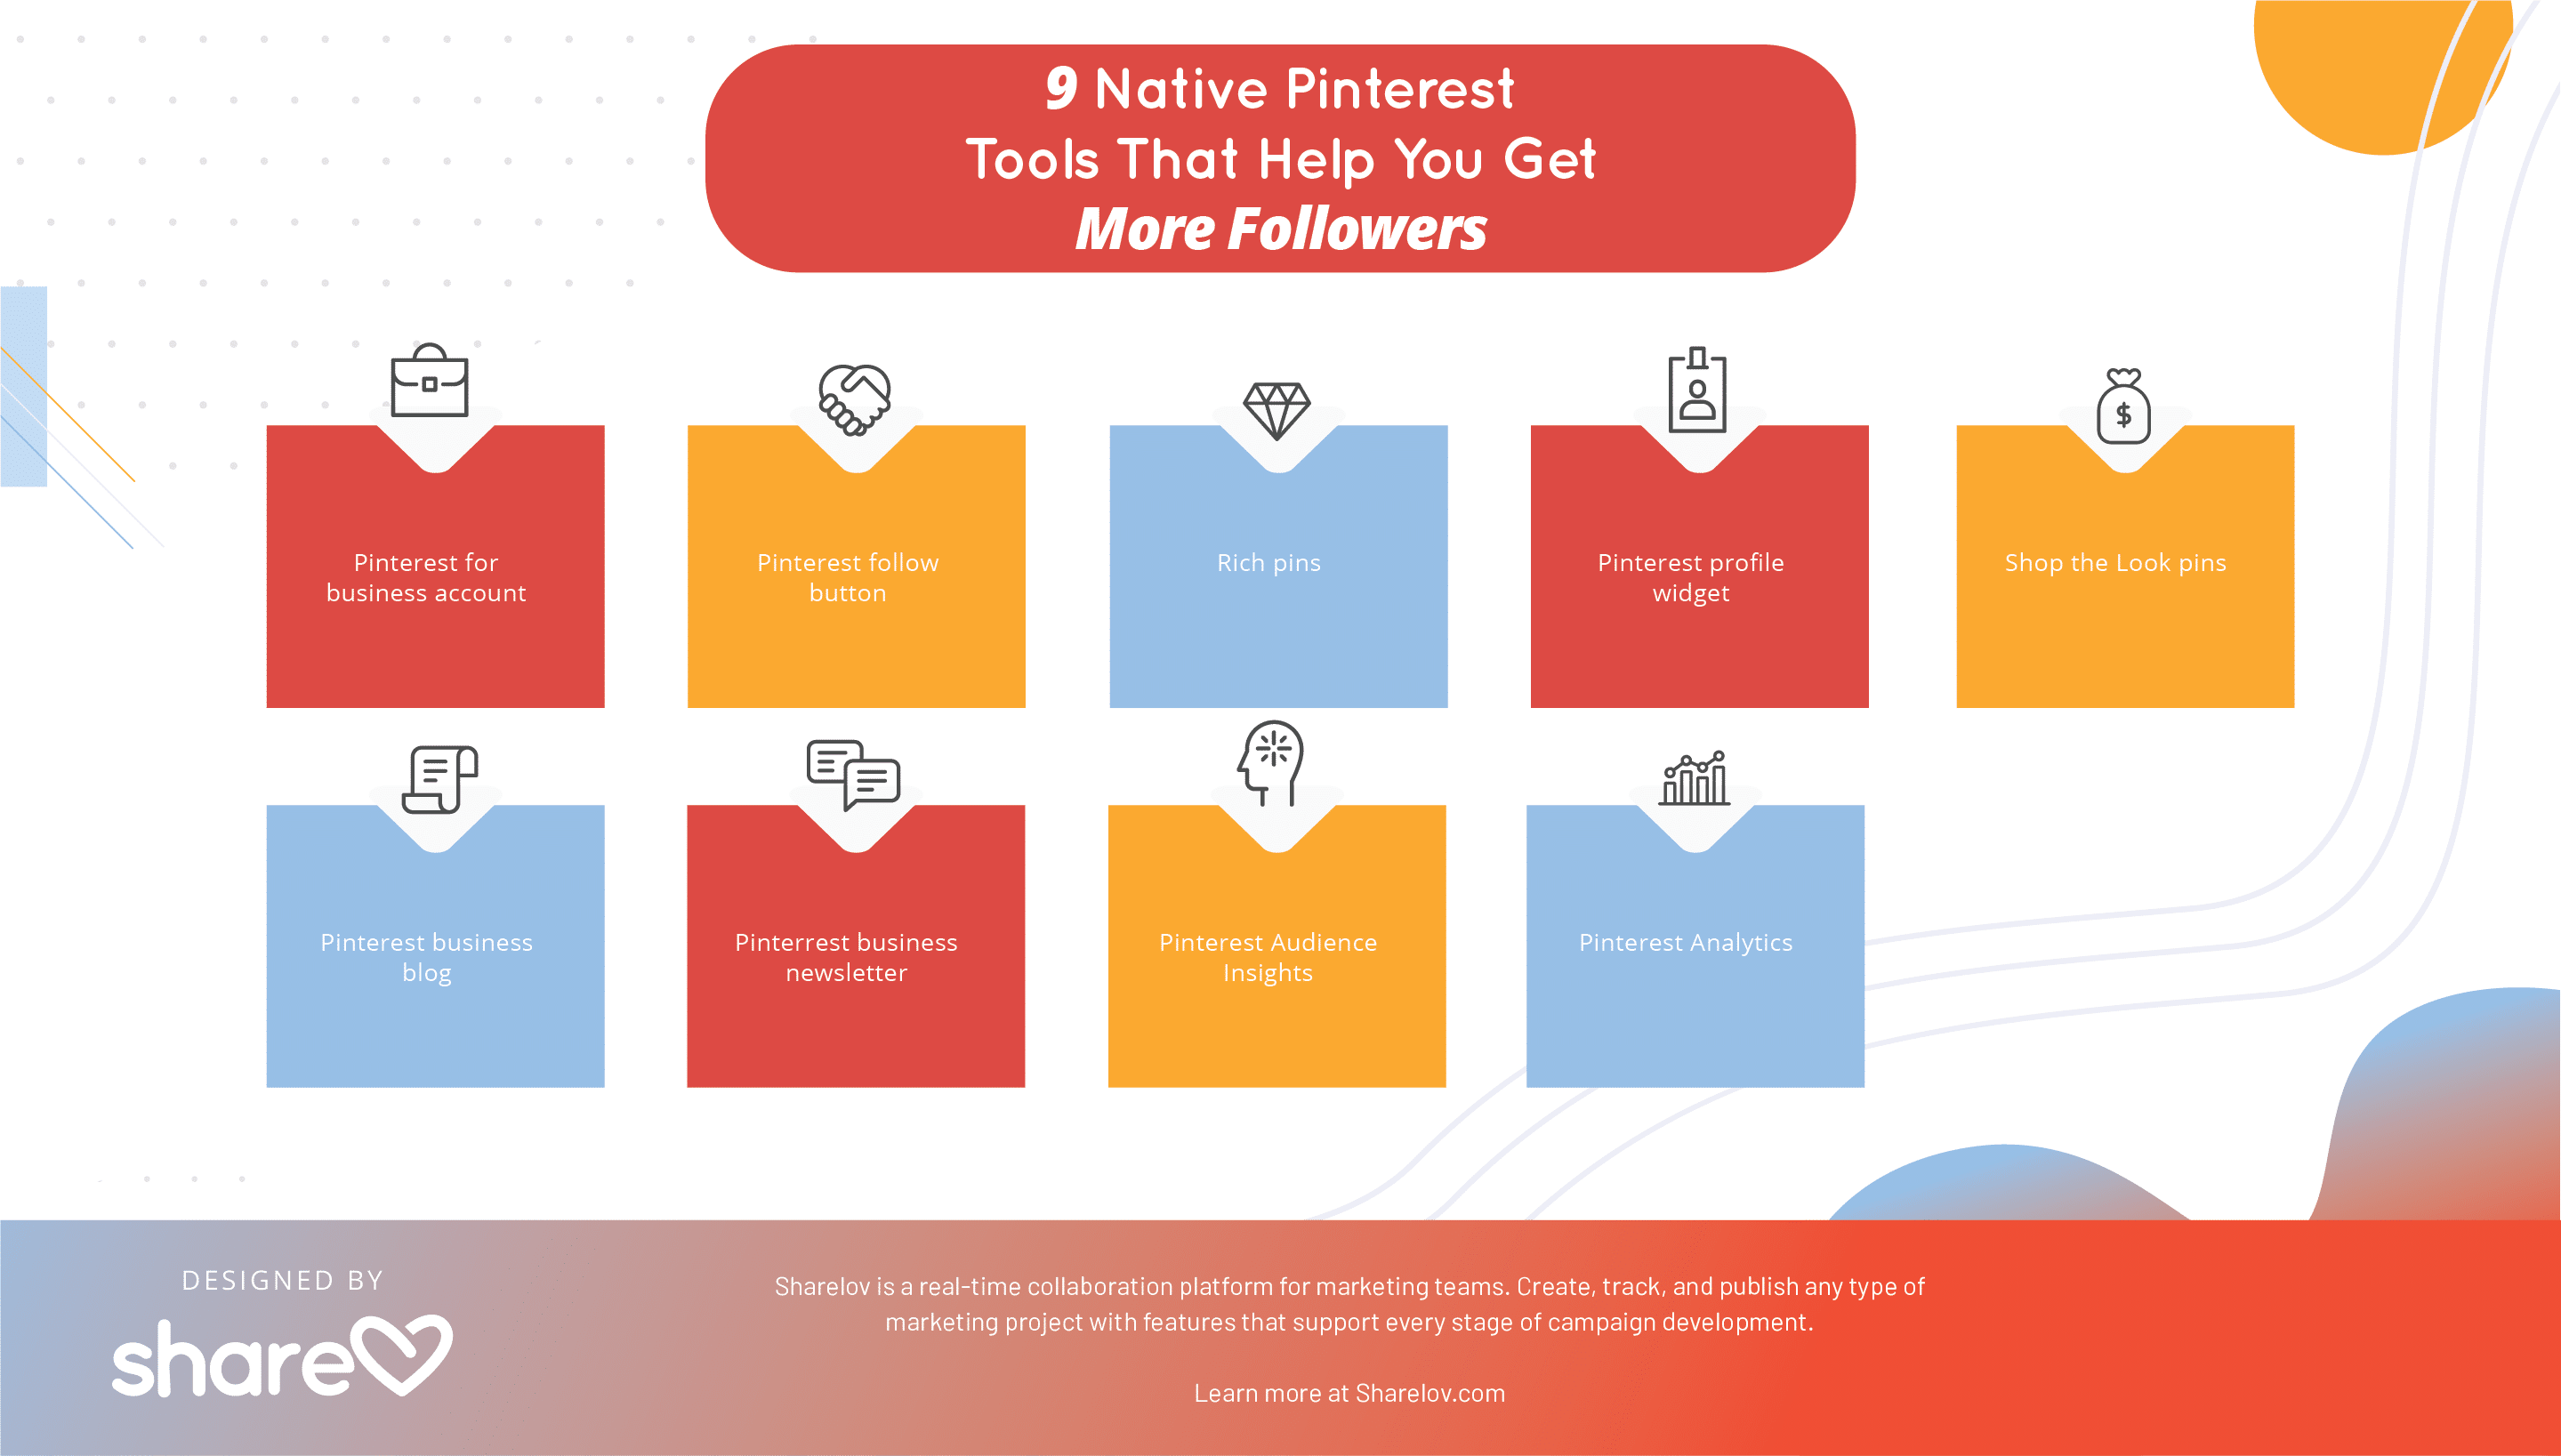 9 Native Pinterest Tools That Help You Get More Followers infographic